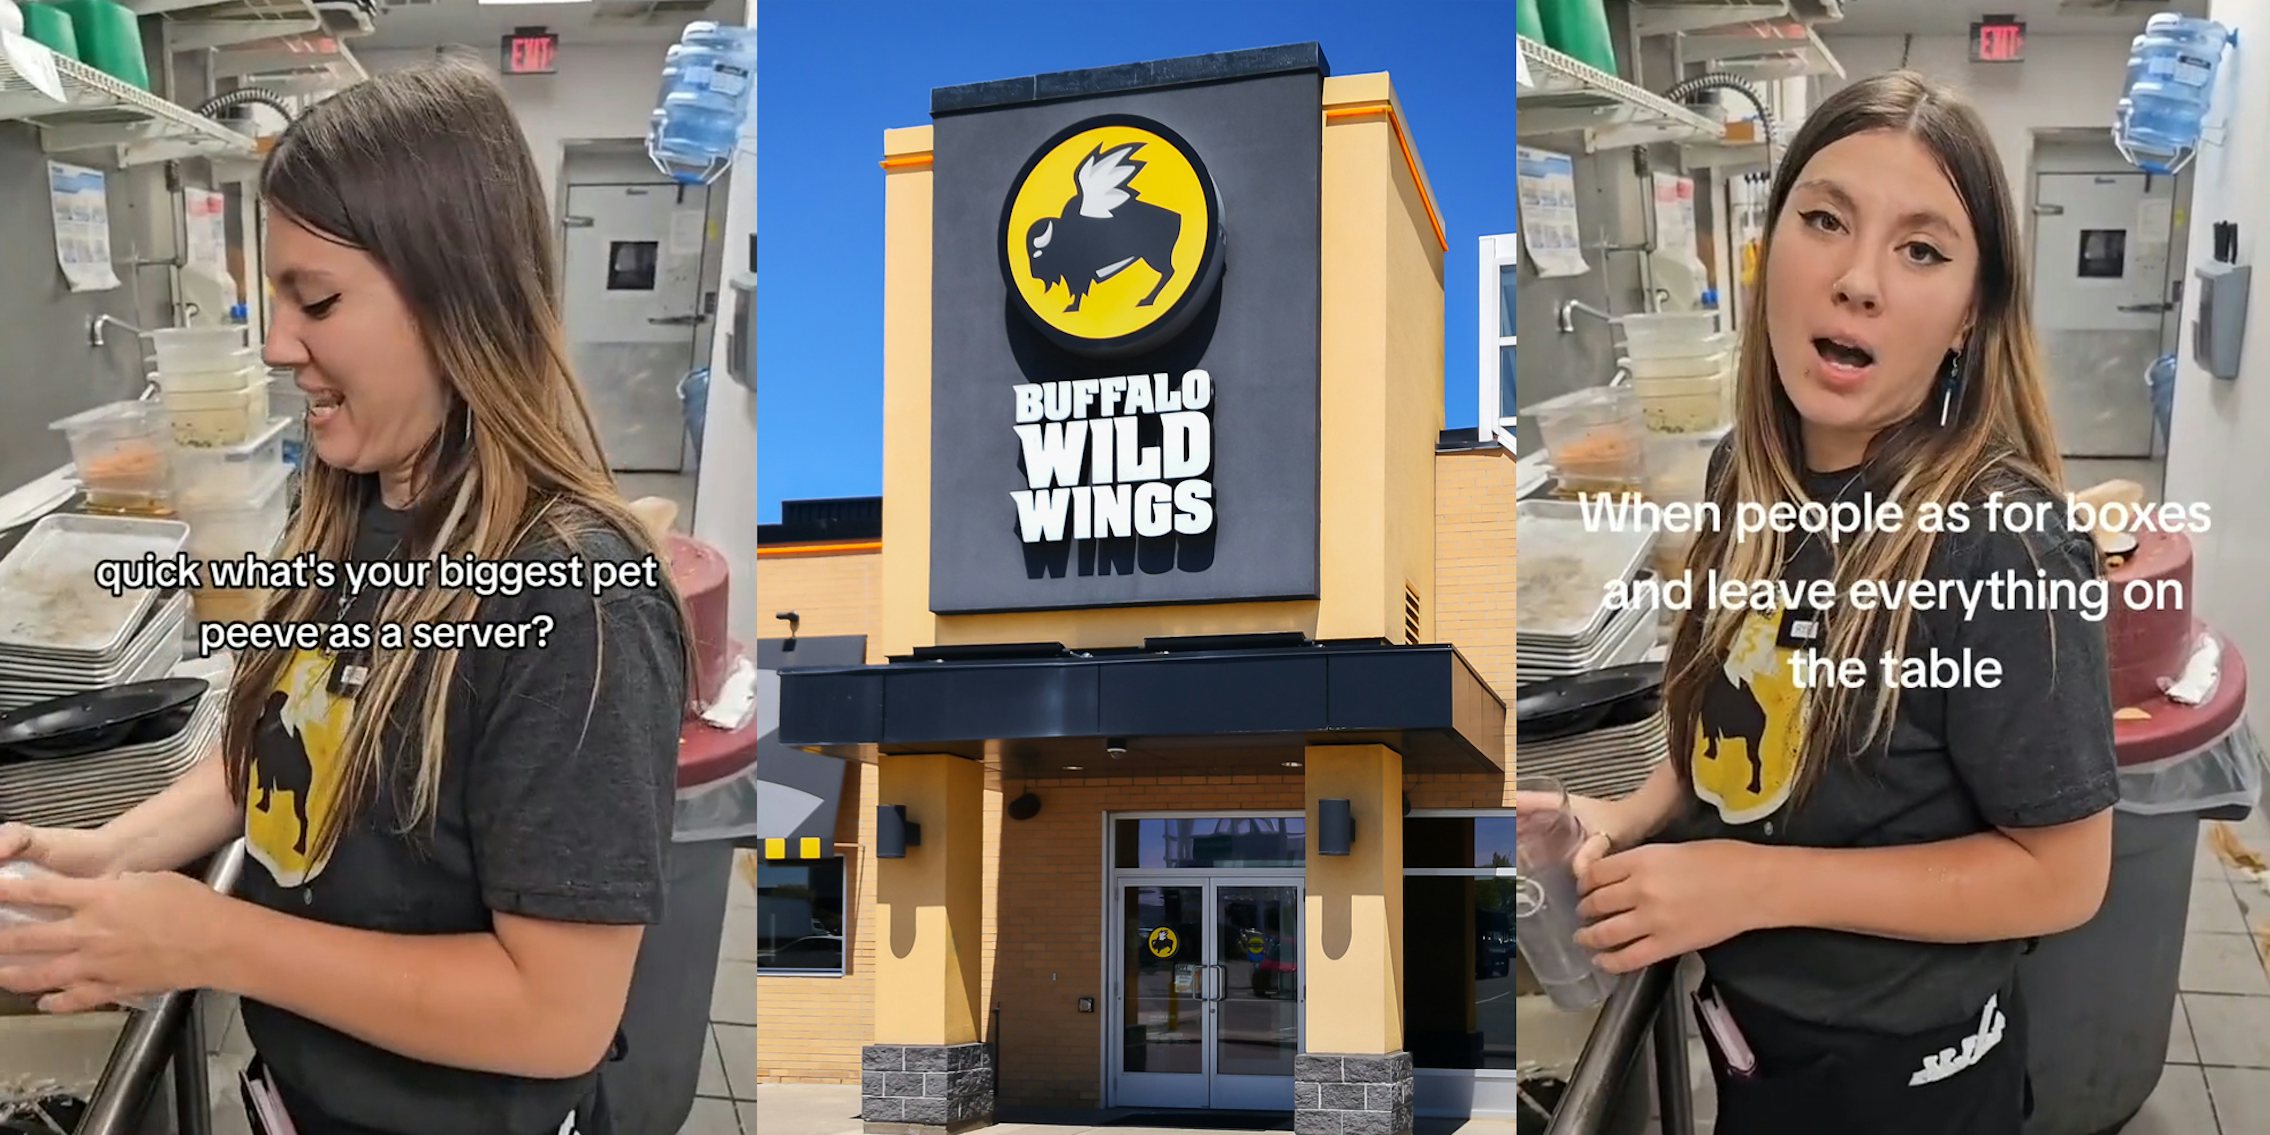 Buffalo Wild Wings server with caption 'quick what's your biggest pet peeve as a server?' (l) Buffalo Wild Wings building with sign (c) Buffalo Wild Wings server speaking with caption 'When people ask for boxes and leave everything on the table' (r)